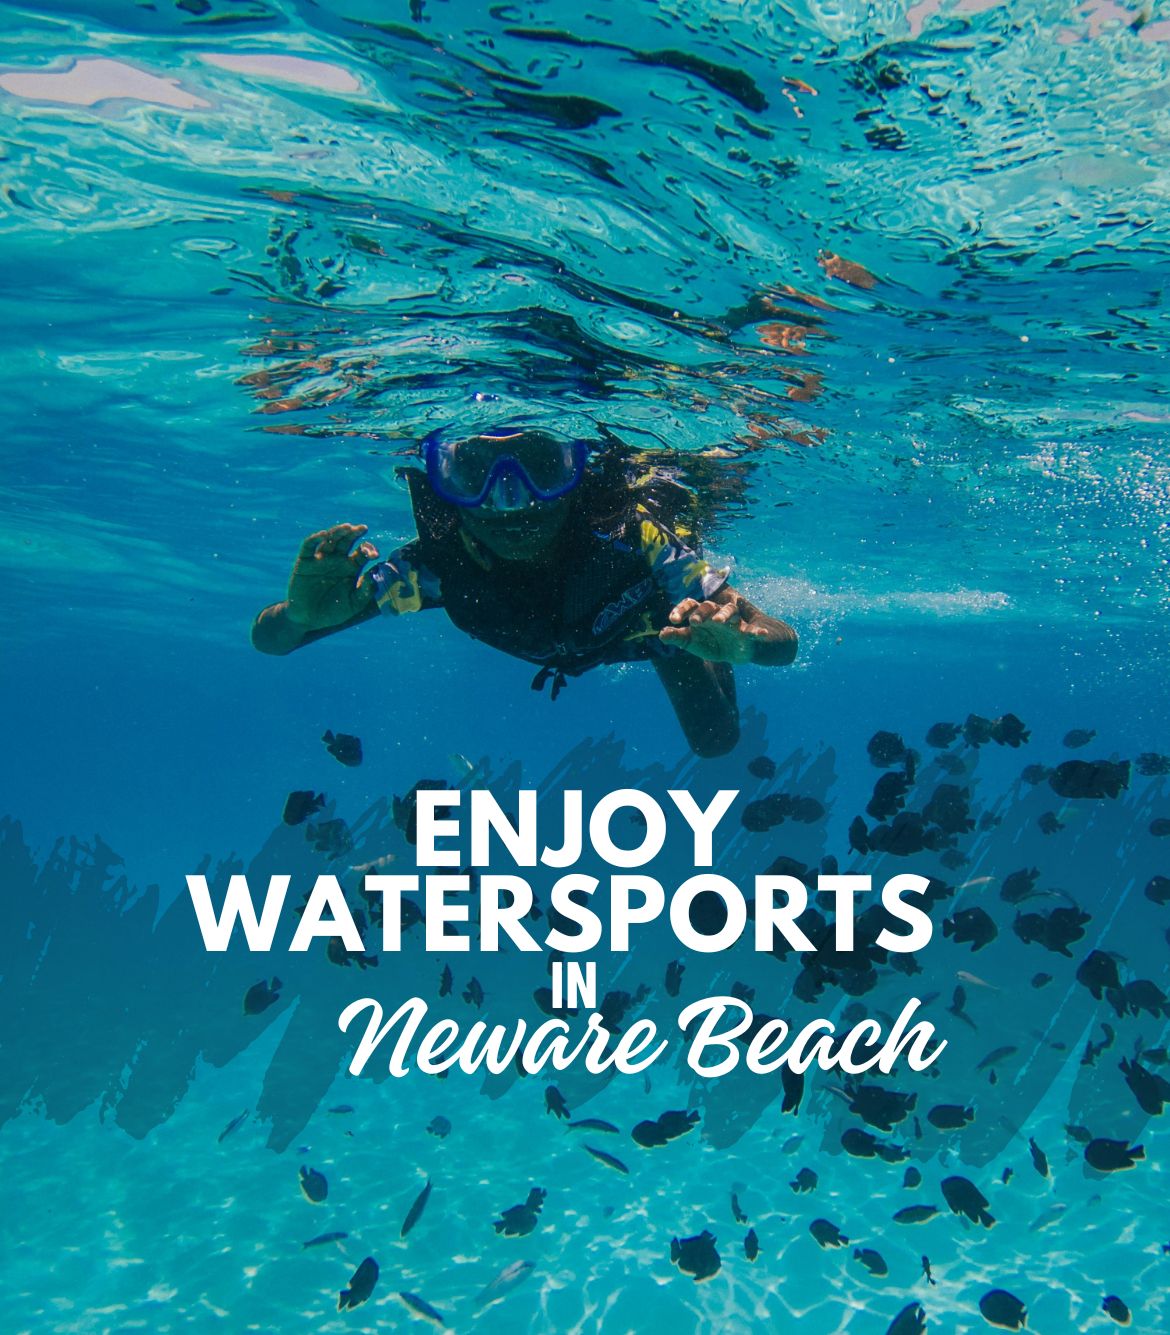 Watersports Package in Neware Beach with Scuba